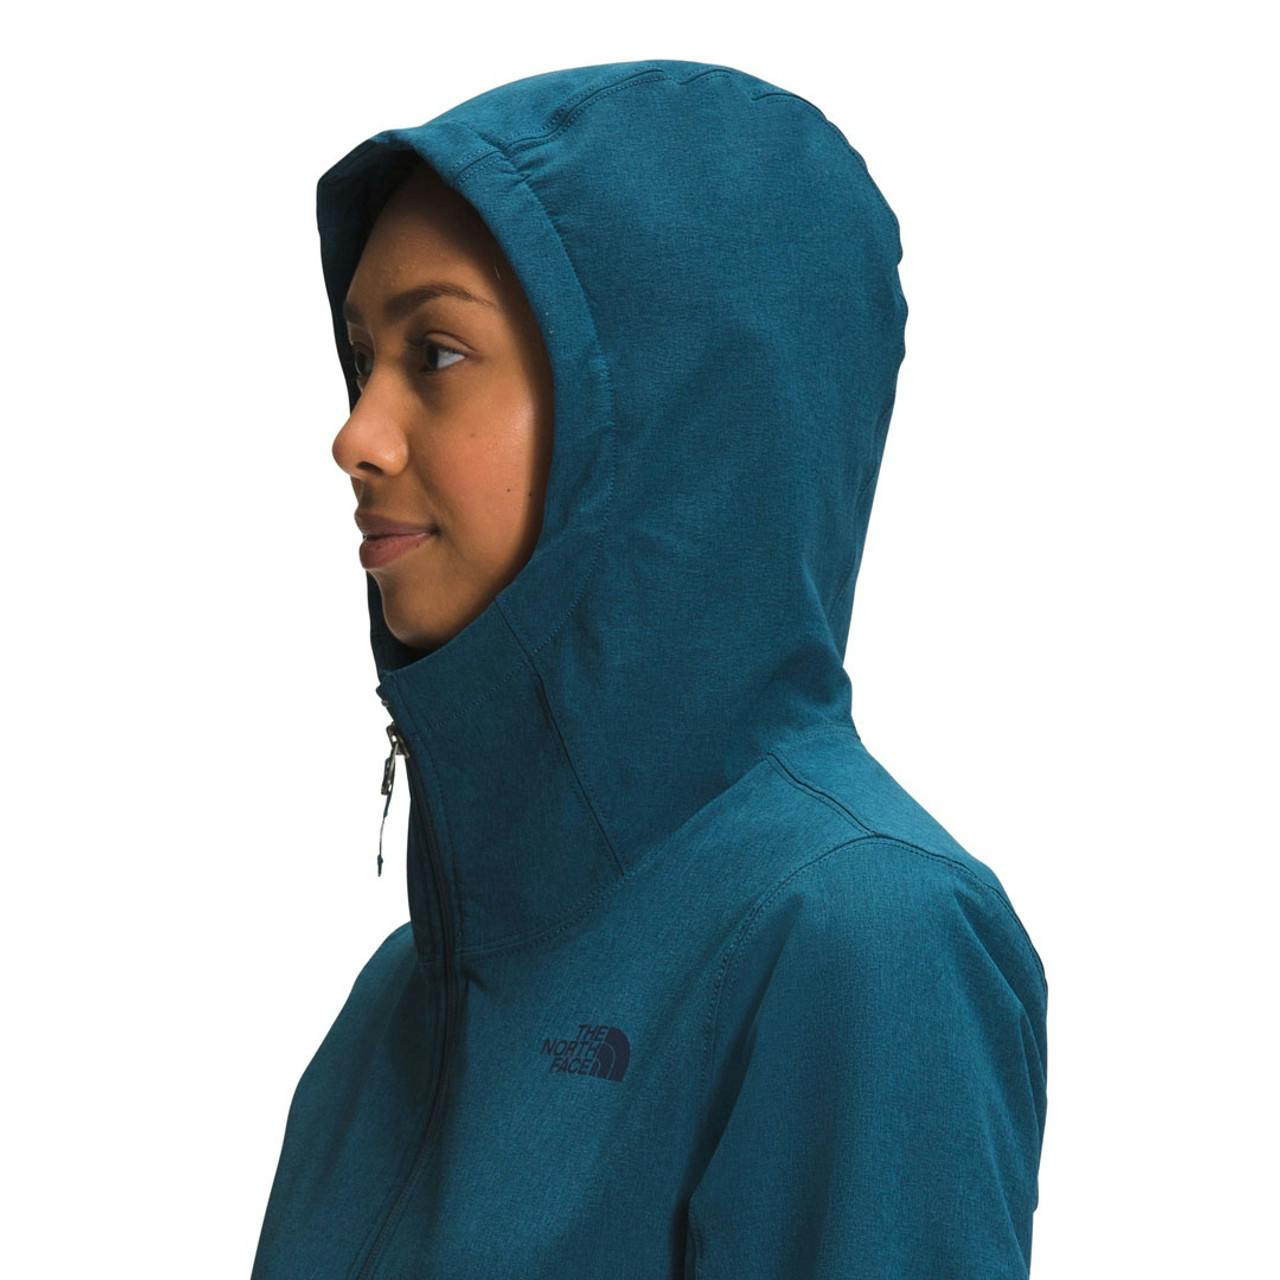 The North Face Women's Shelbe Raschel Parka Length With Hood